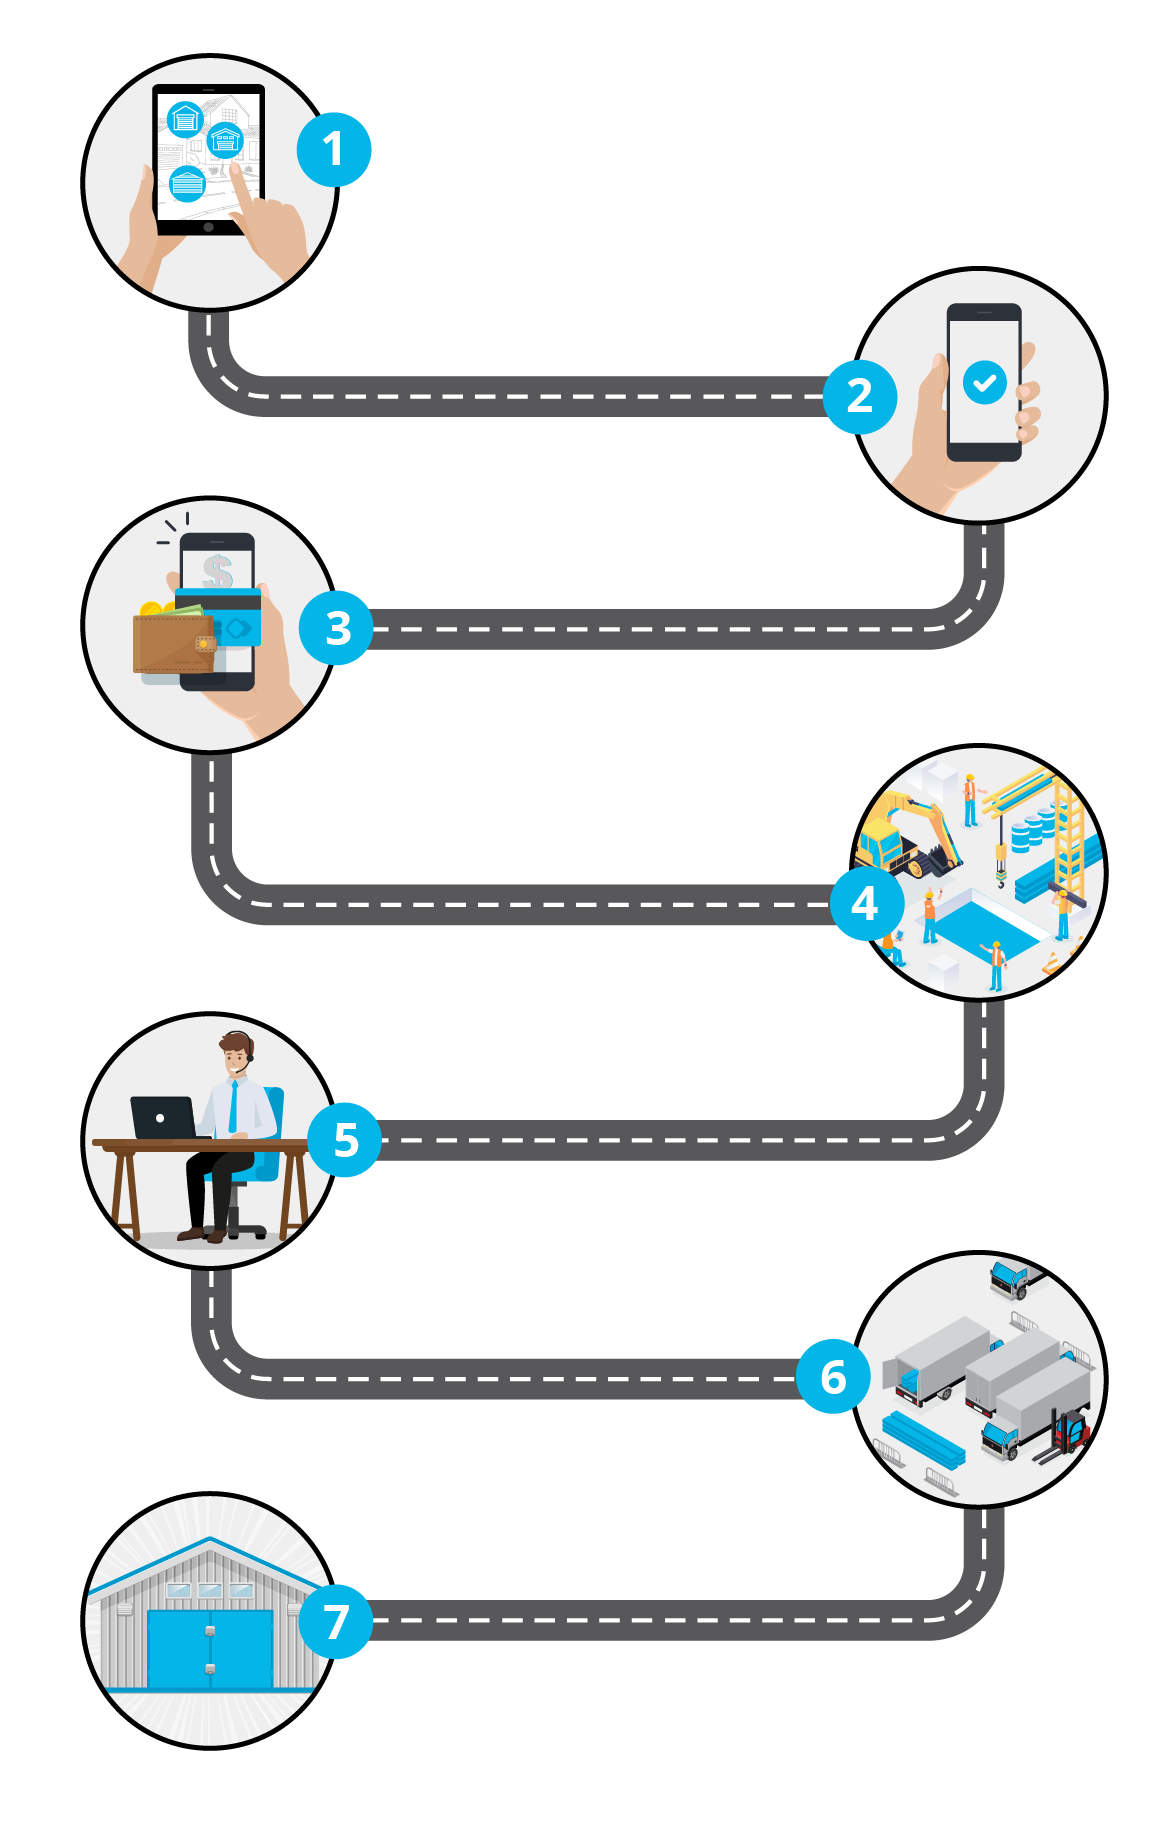 Roadmap graphic showing different steps in the metal building process